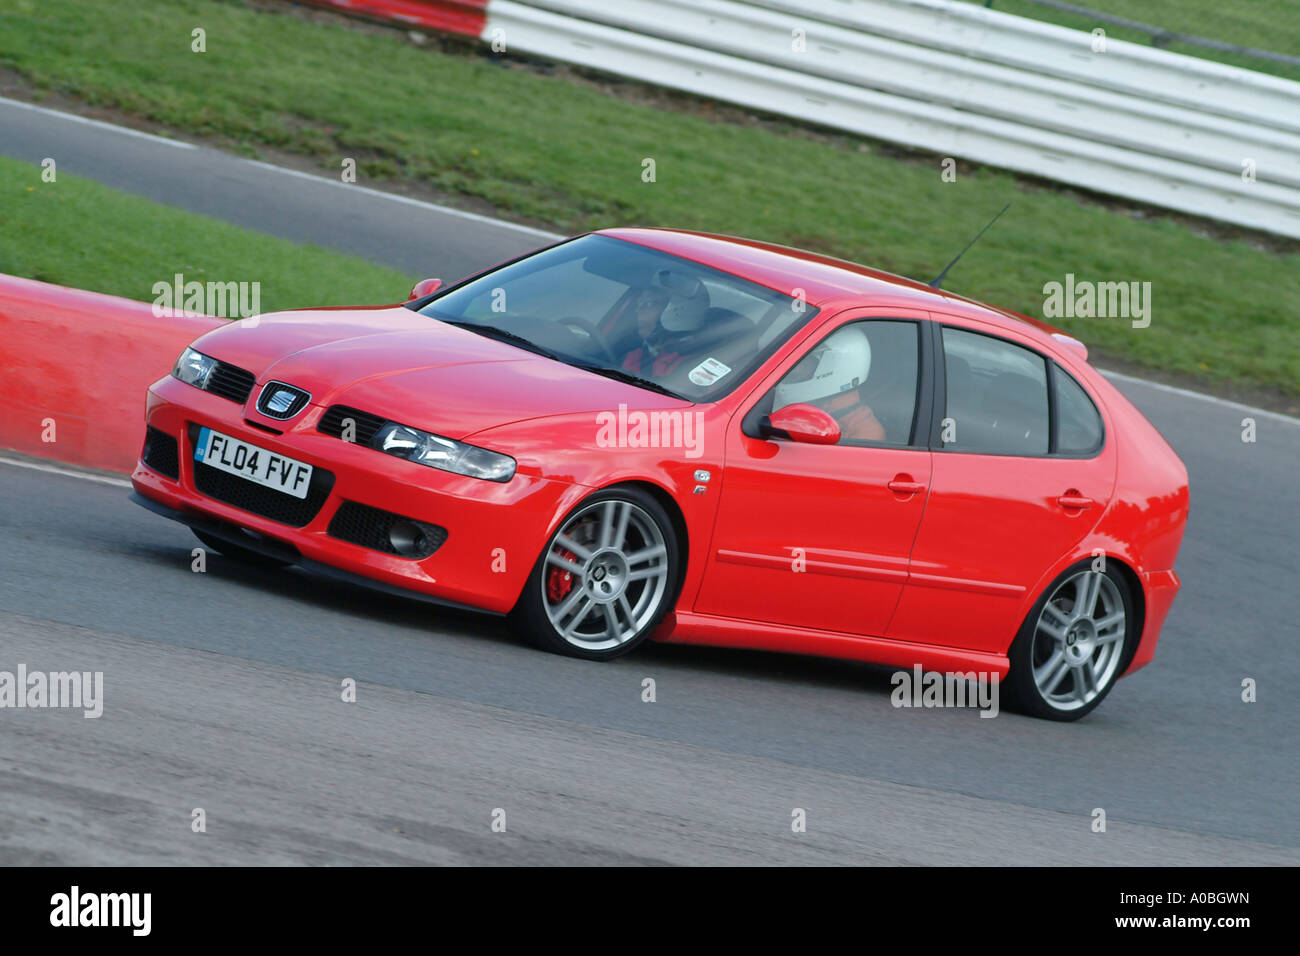 Red Seat Leon Cupra 2004 car on race track in the uk Stock Photo